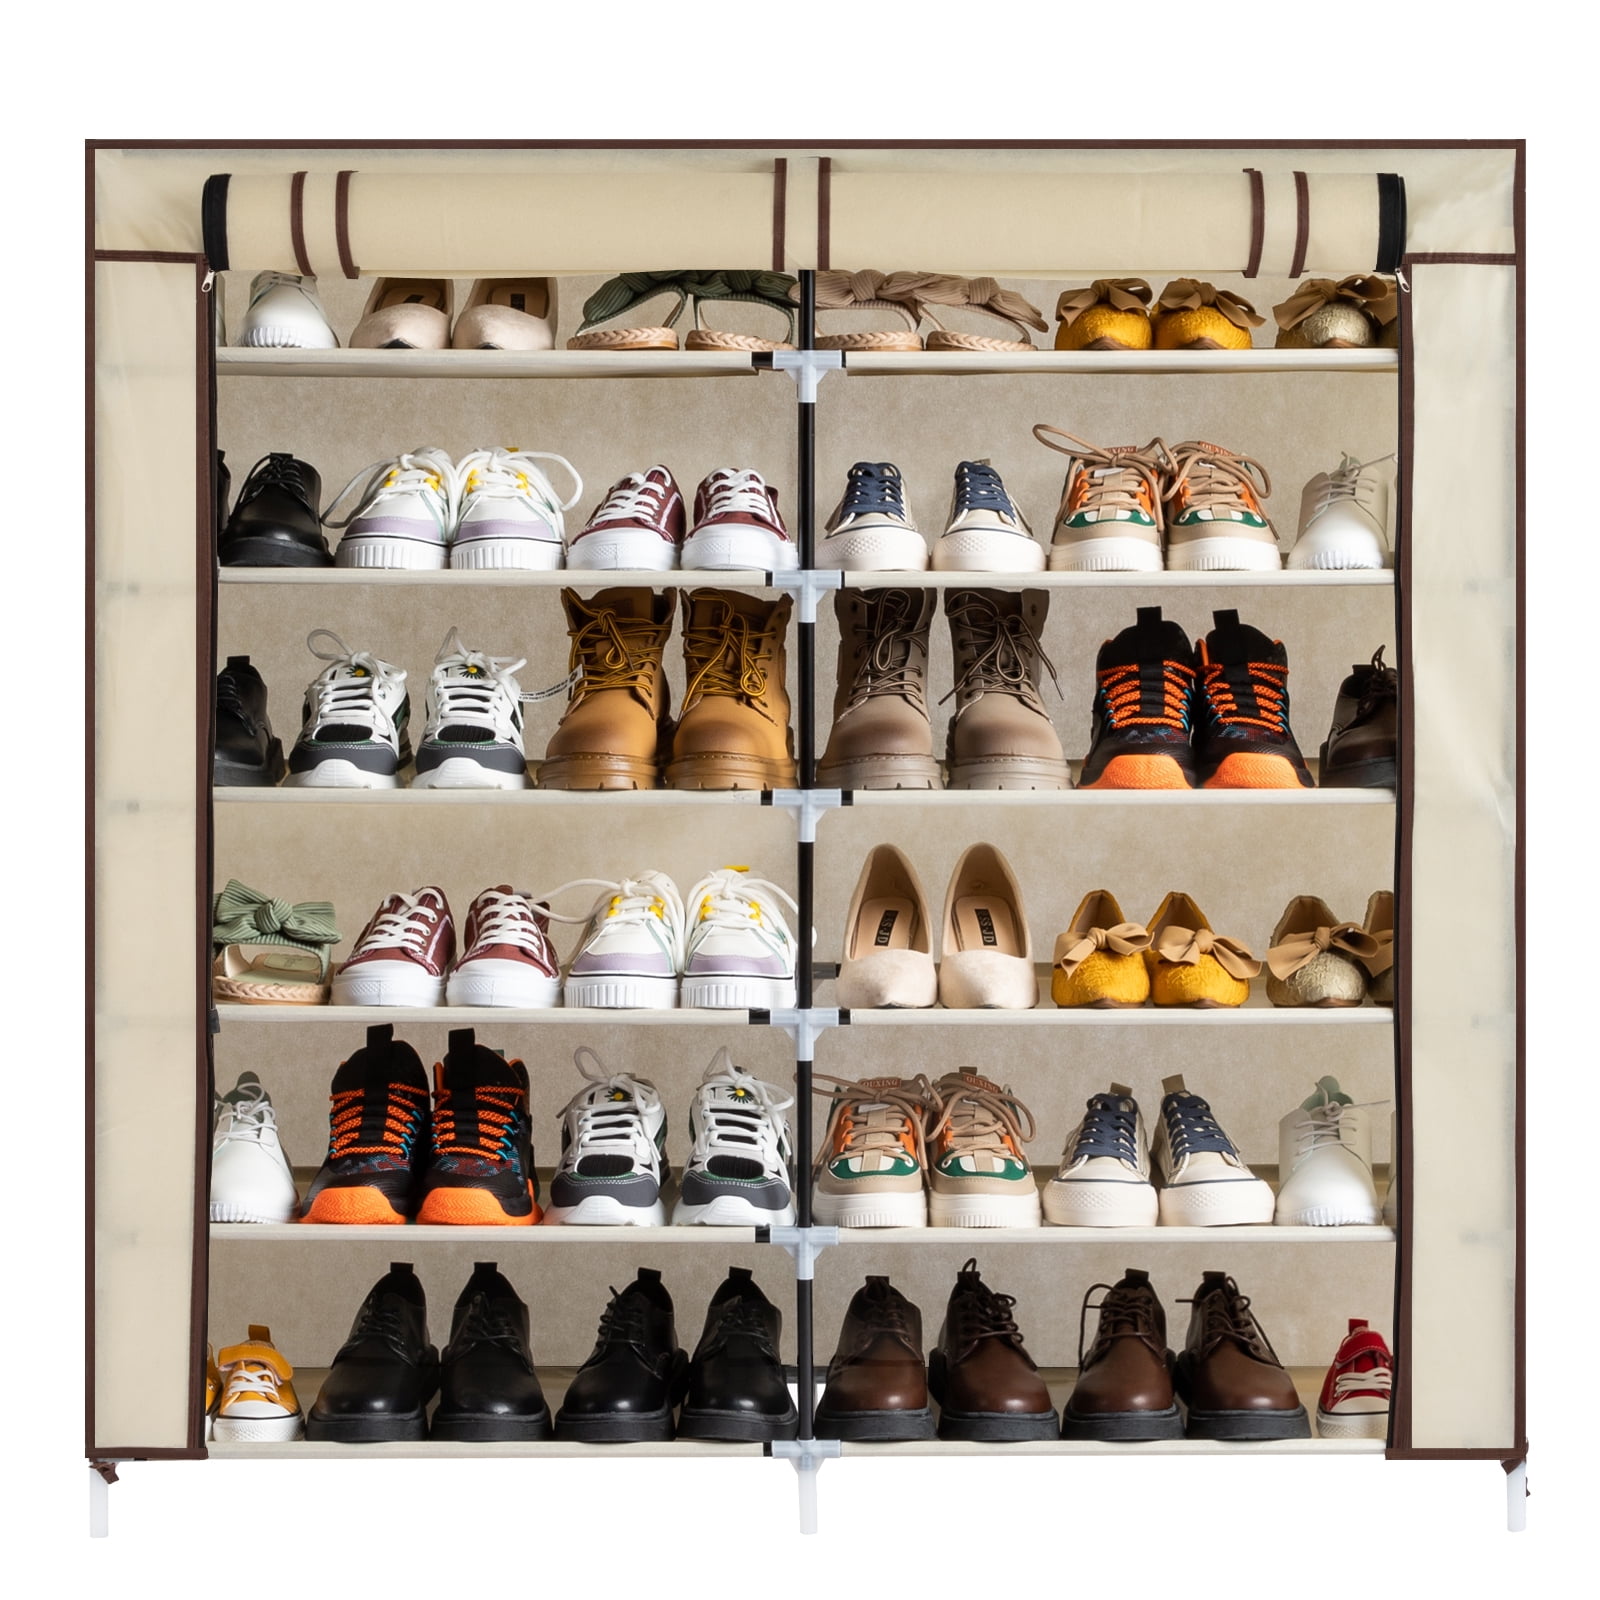 Keenstone 7-Tier Shoe Rack,18 Pairs Shoes Shelf Storage Organizer for Shoe Boots Stackable Cabinet ,Black, Size: 35 Large x 11 W x 43 H